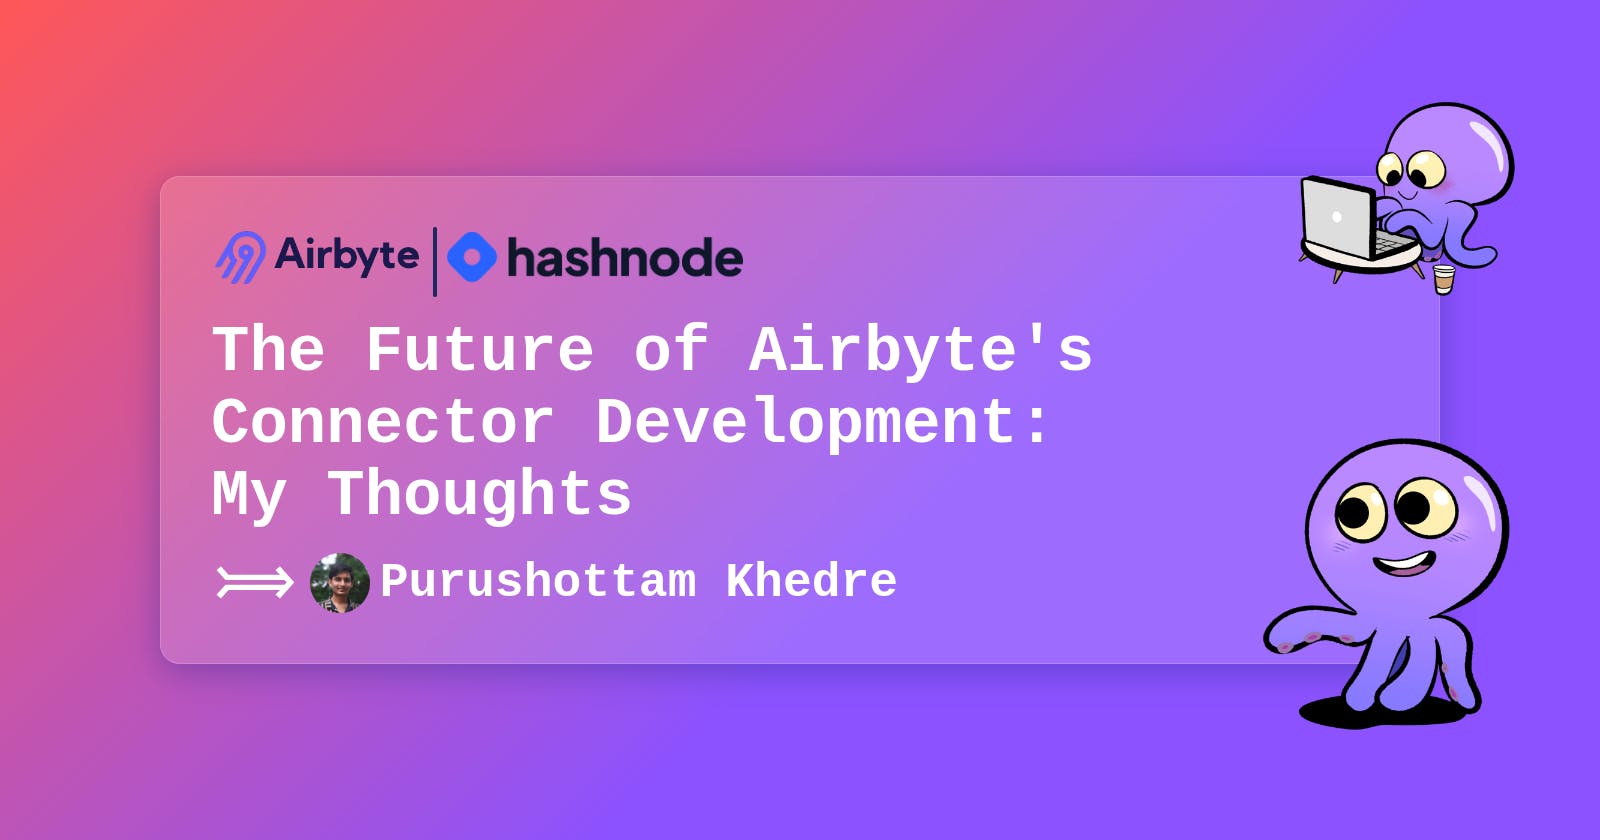 The Future of Airbyte Connector Development: My Thoughts on Low-code CDK